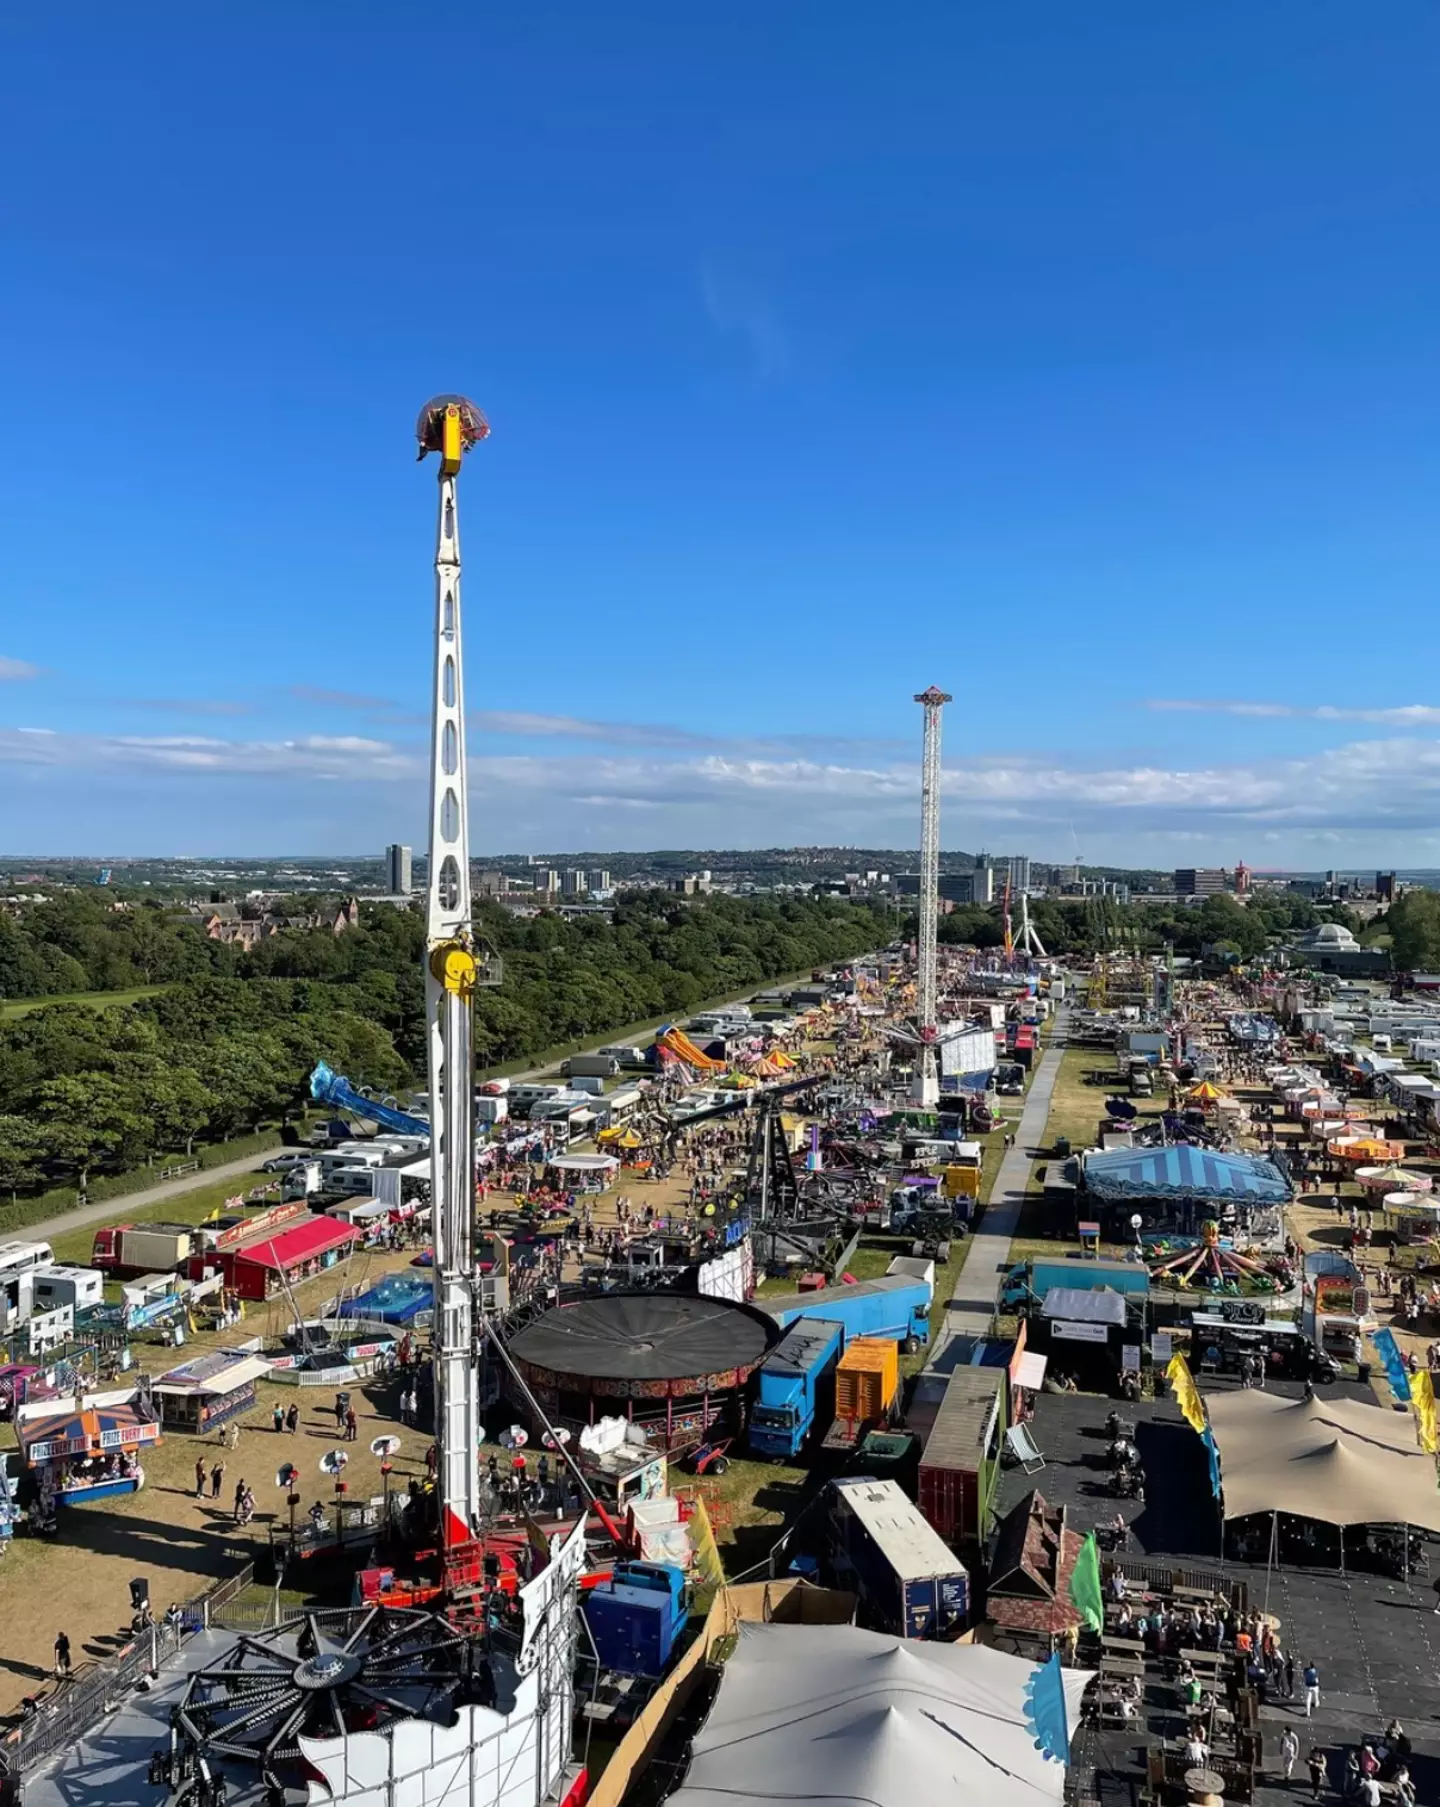 The Hoppings funfair is back this summer.